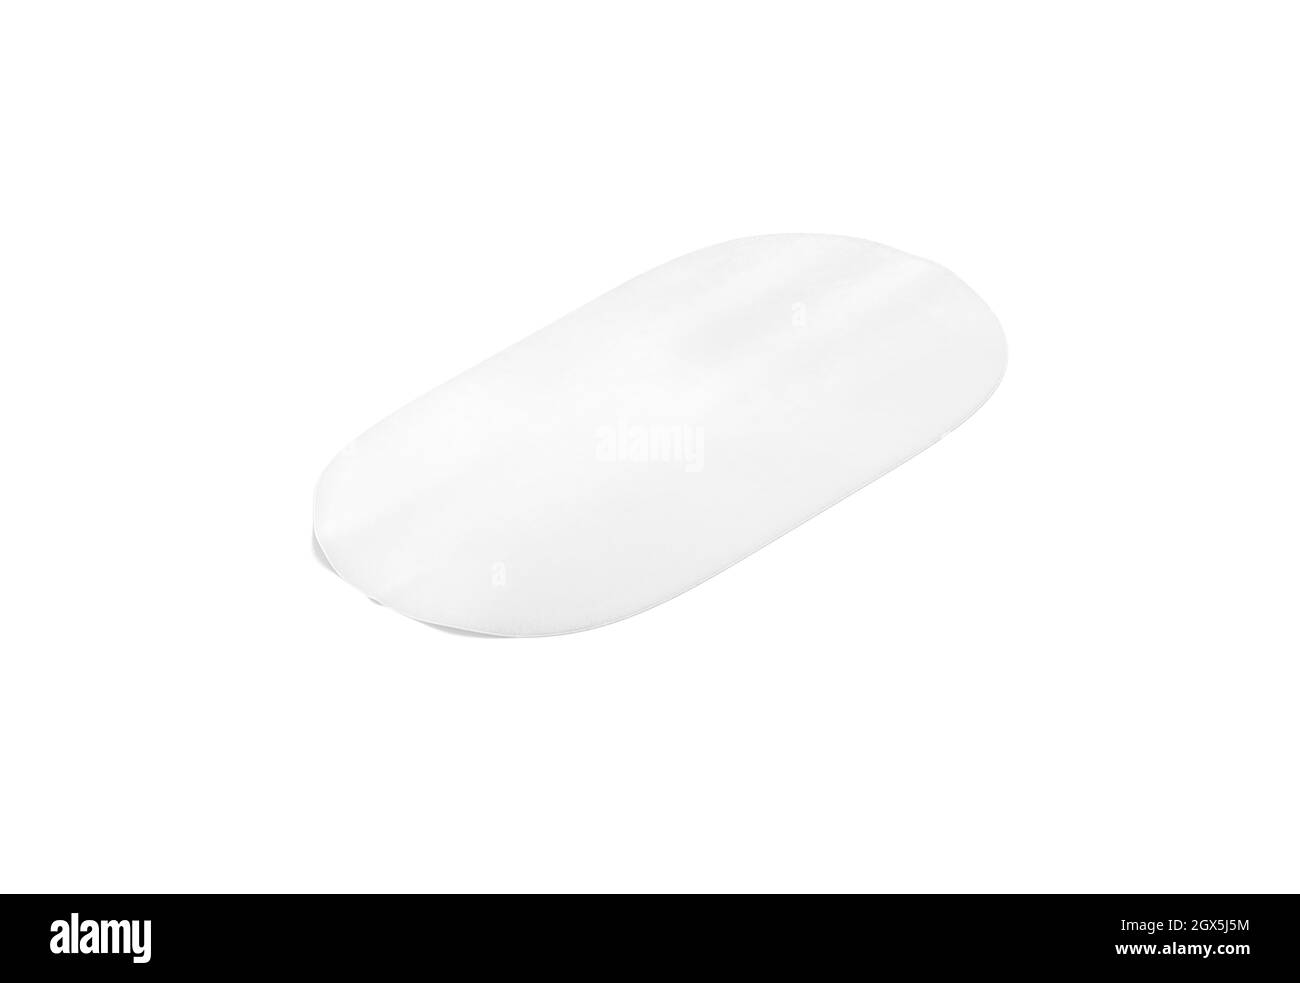 Blank white oval interior carpet mock up, side view, 3d rendering. Empty decorative flooring ground pad mockup, isolated. Clear textile or furry doorm Stock Photo